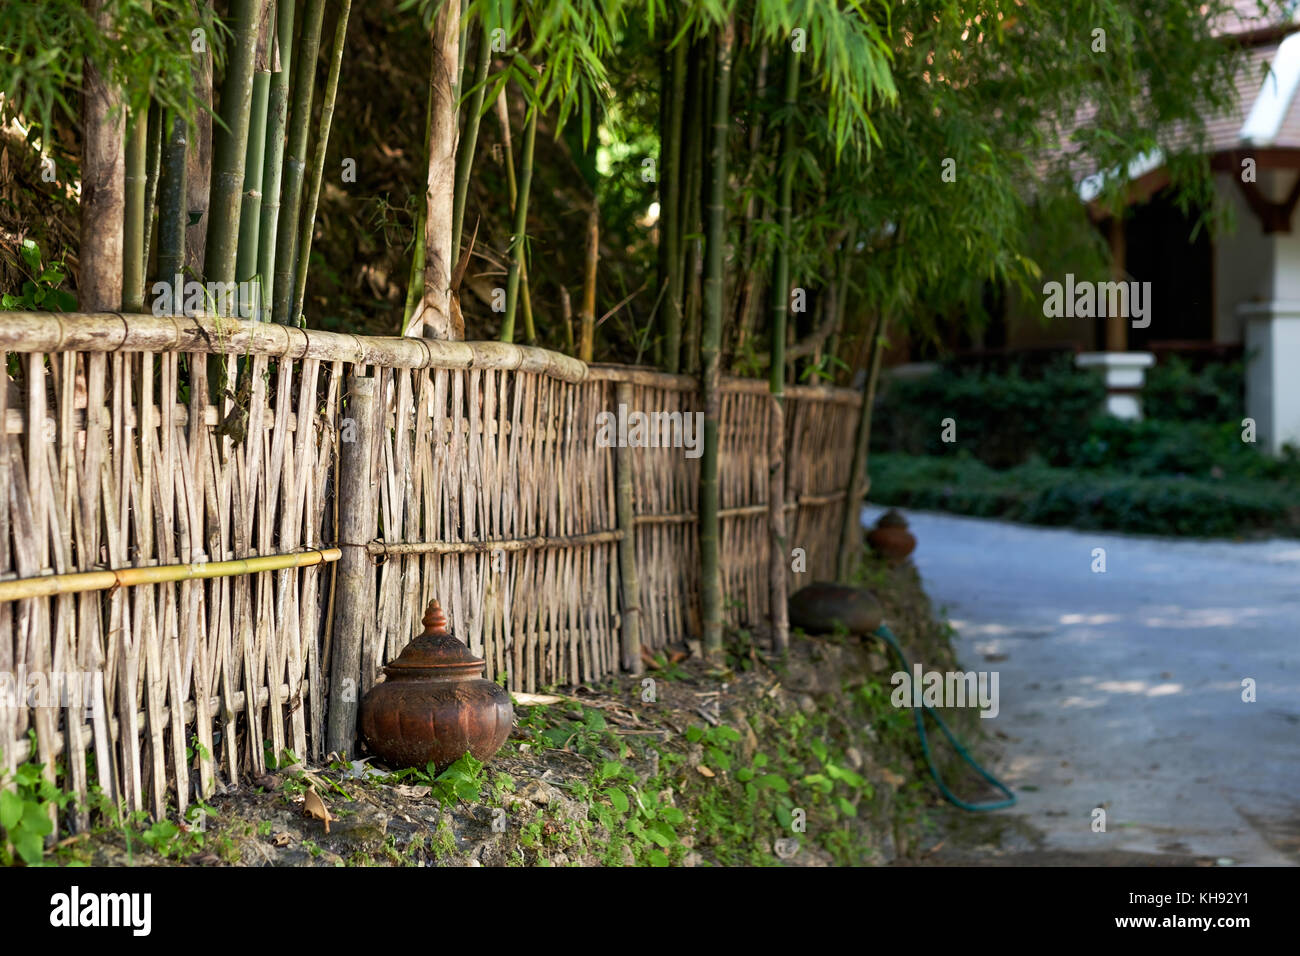 A small street of a Thai village. Bamboo fence and blurred house in the background. Calm atmosphere for rest Stock Photo